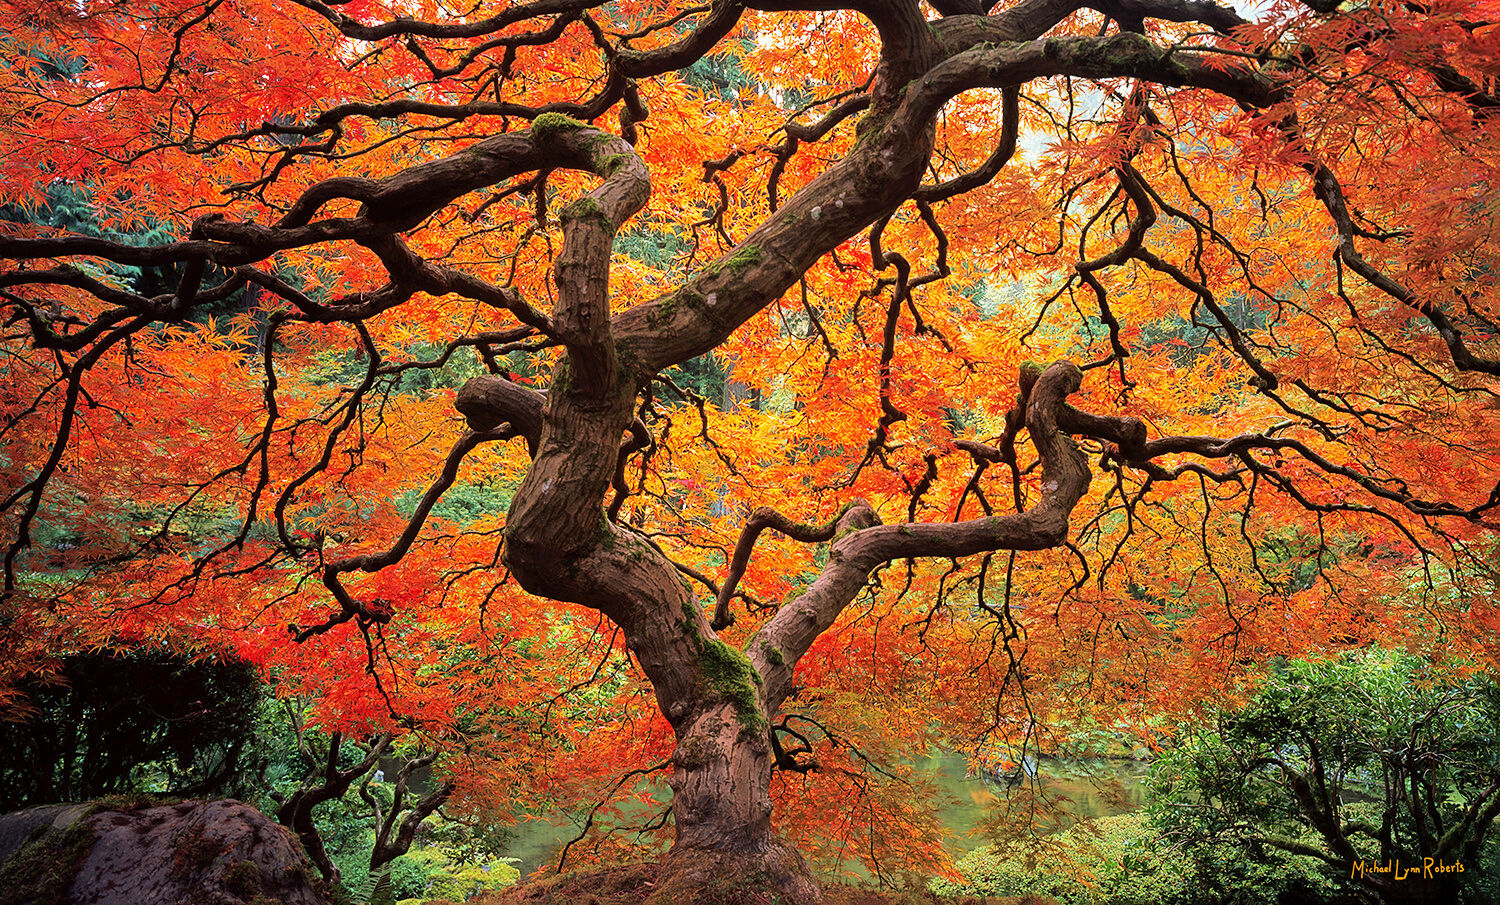 Ahhhh...the Famous Portland Japanese Garden Maple Tree in all its fall color glory! The Pacific Northwest is an area I want to...